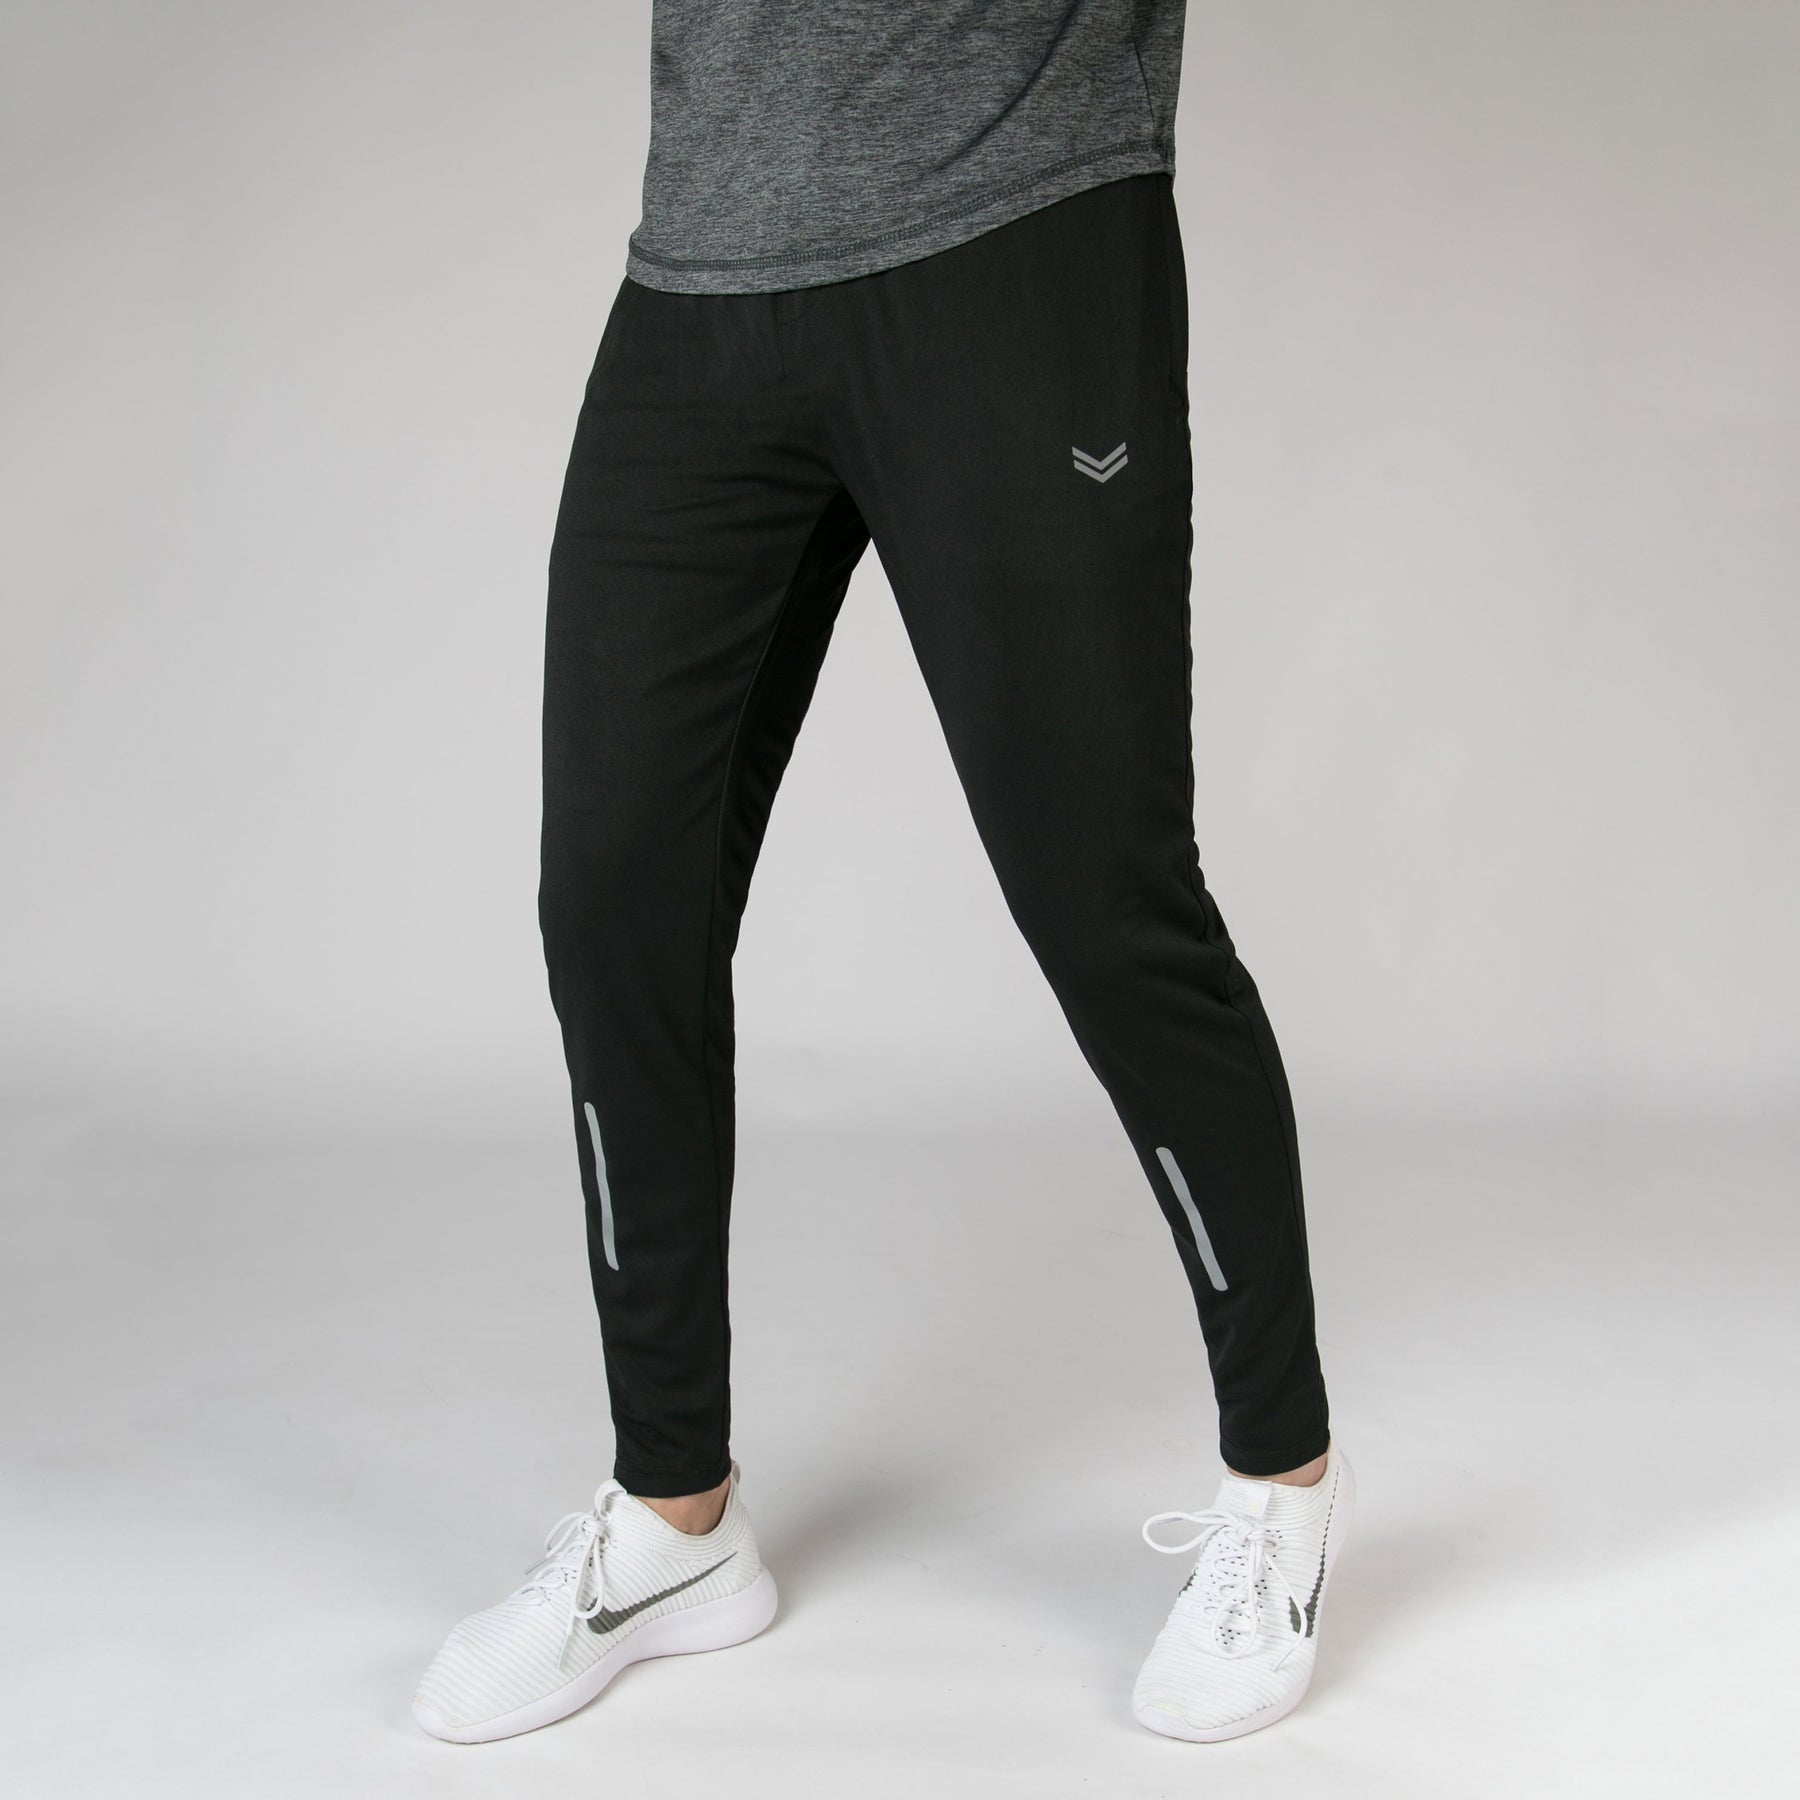 Black Quick Dry Bottoms With Reflective Detailing – Rad Clothing Store